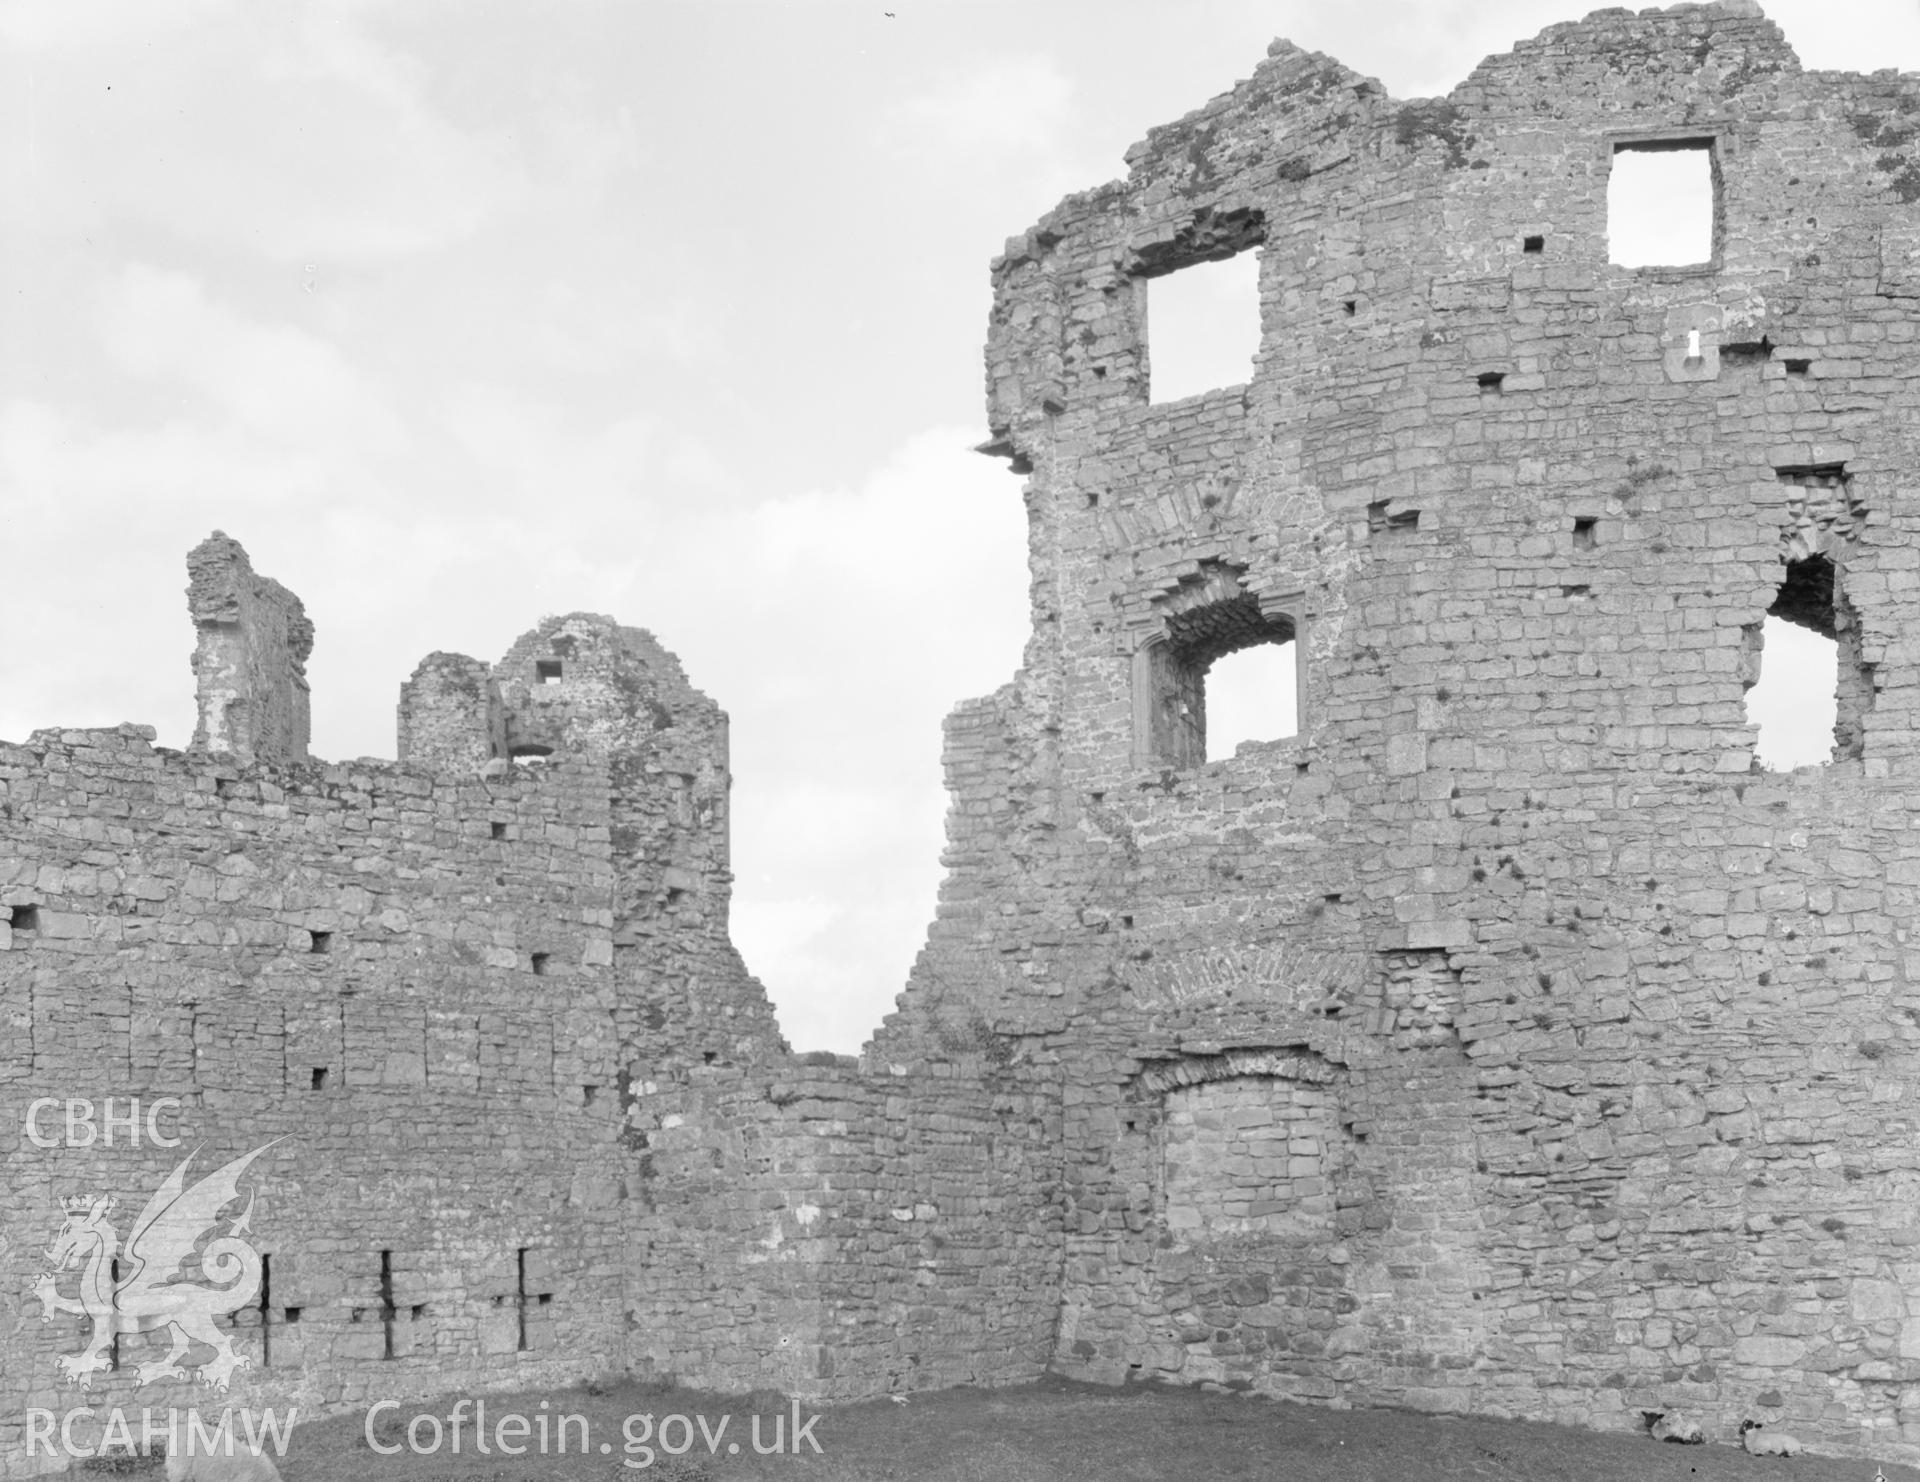 General view of Coity Castle, Coity Higher taken 09.04.65.